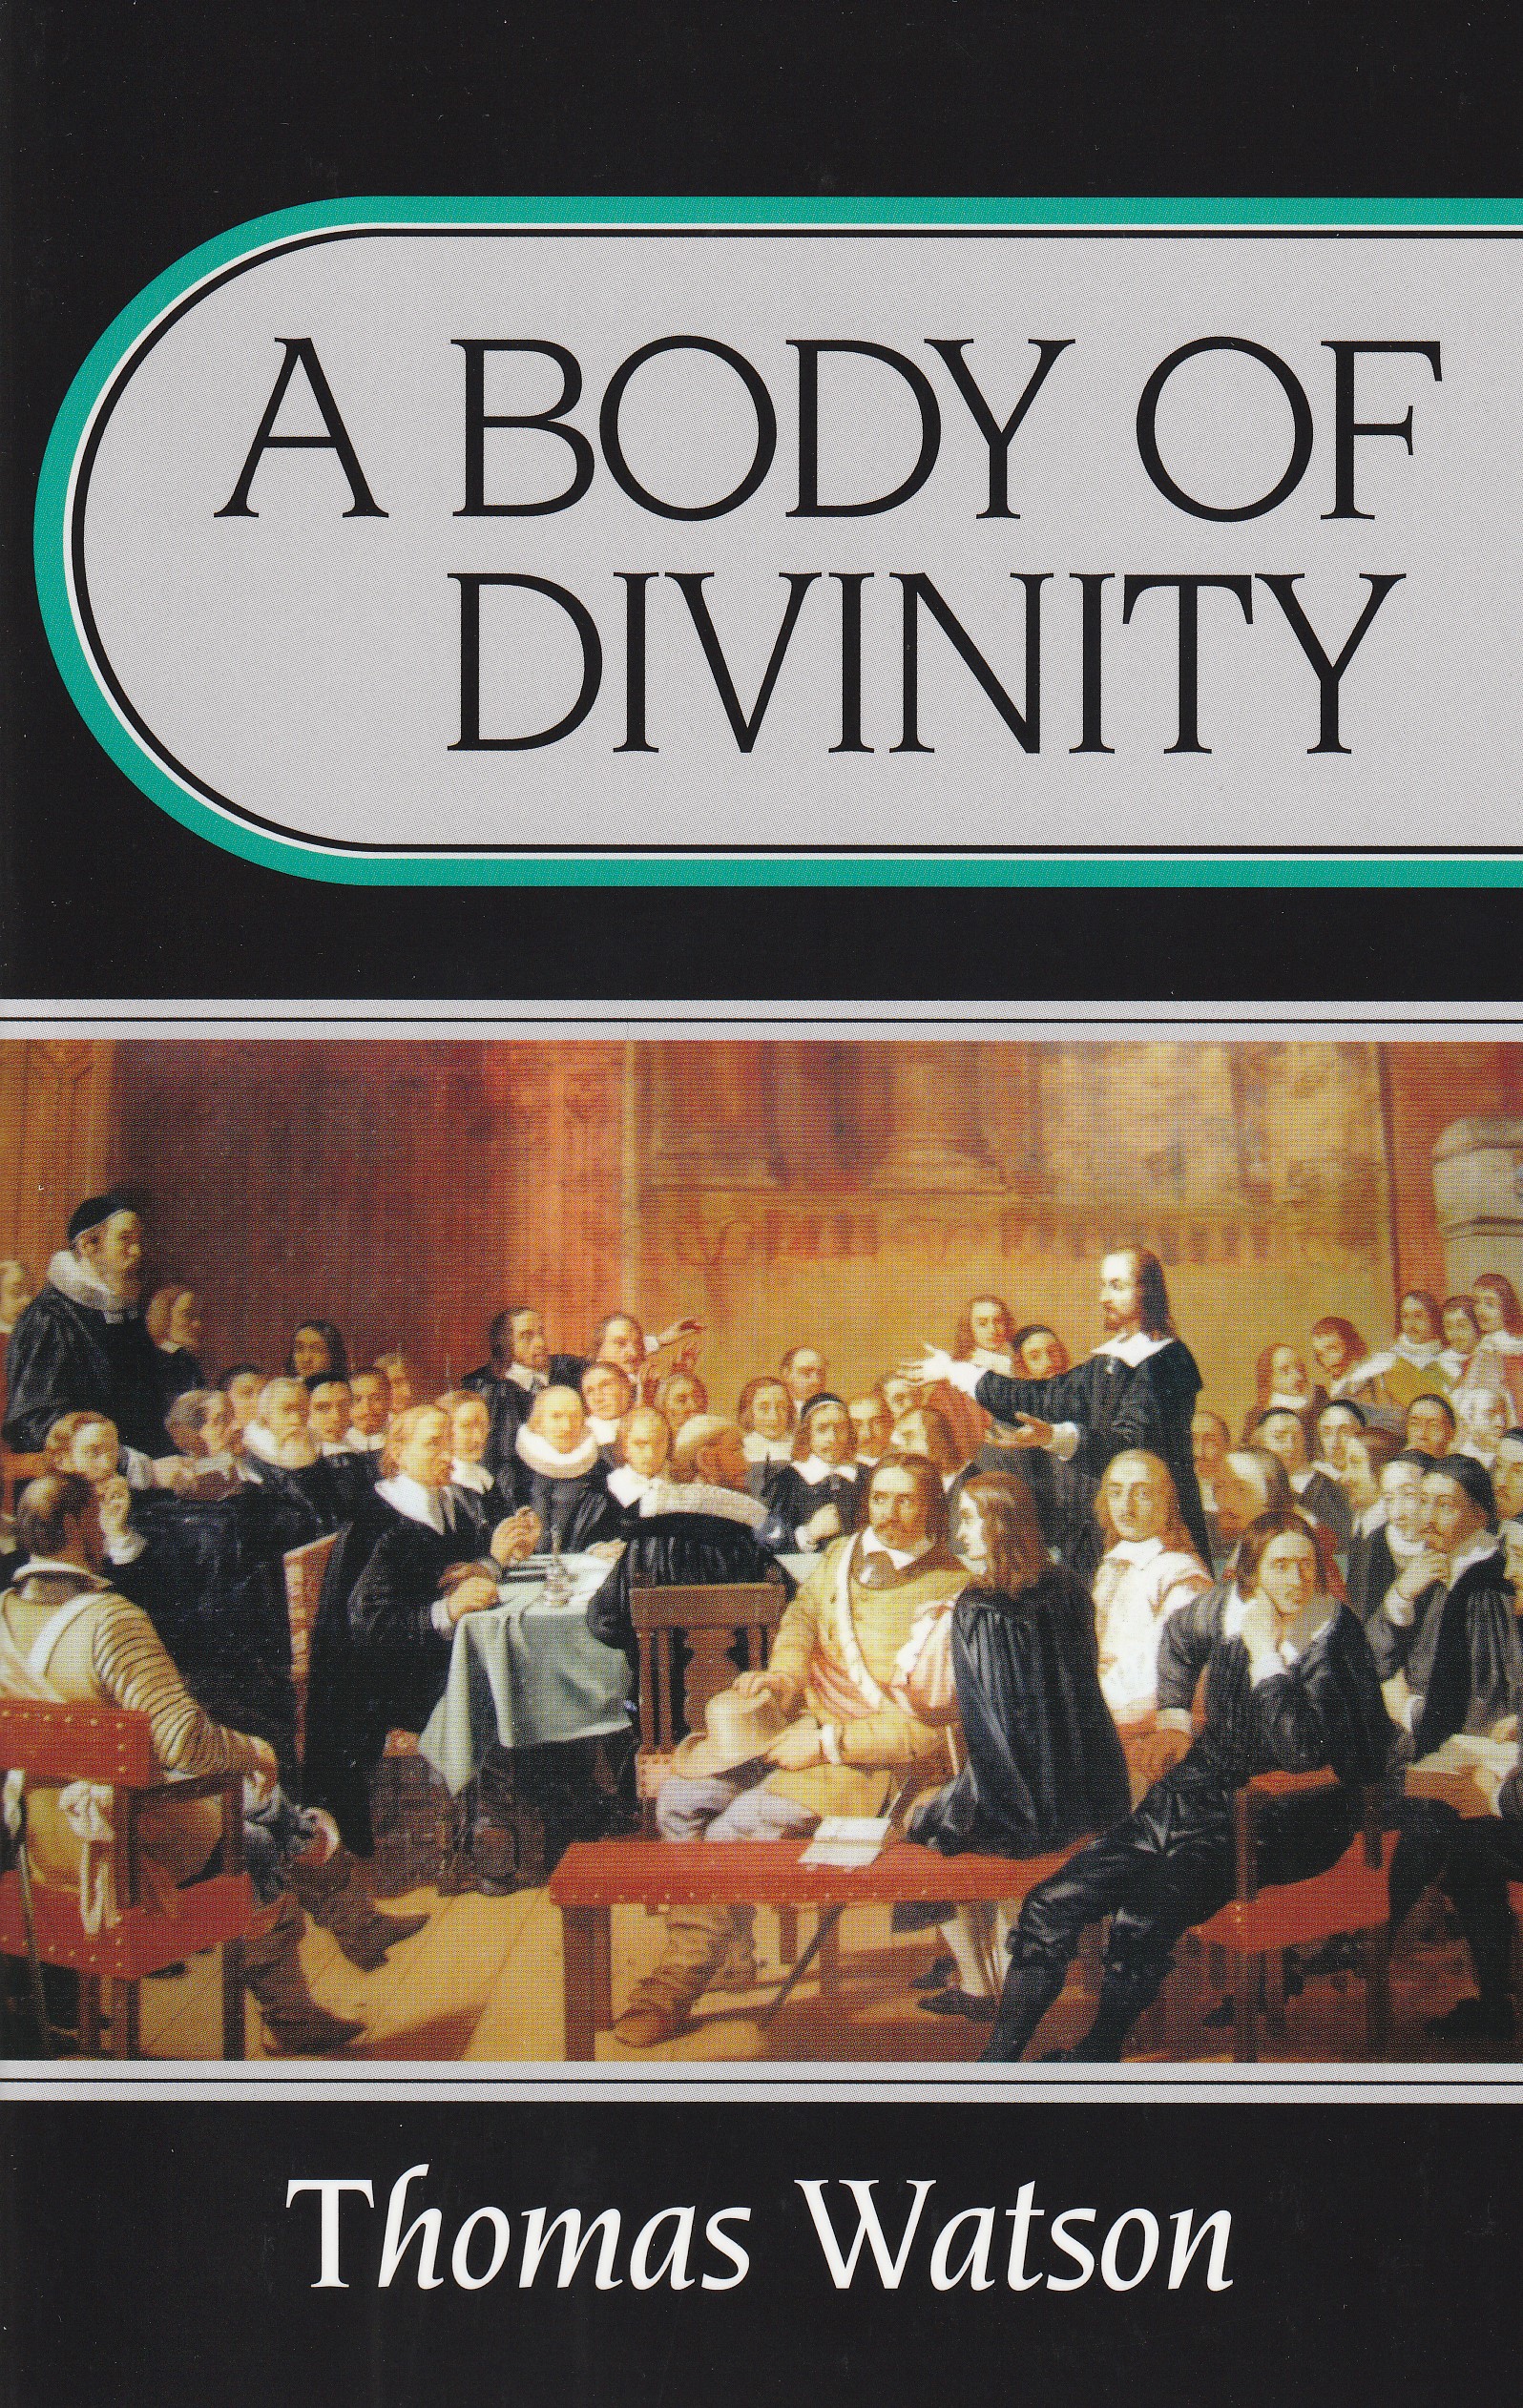 A Body of Divinity (Watson) (paperback)